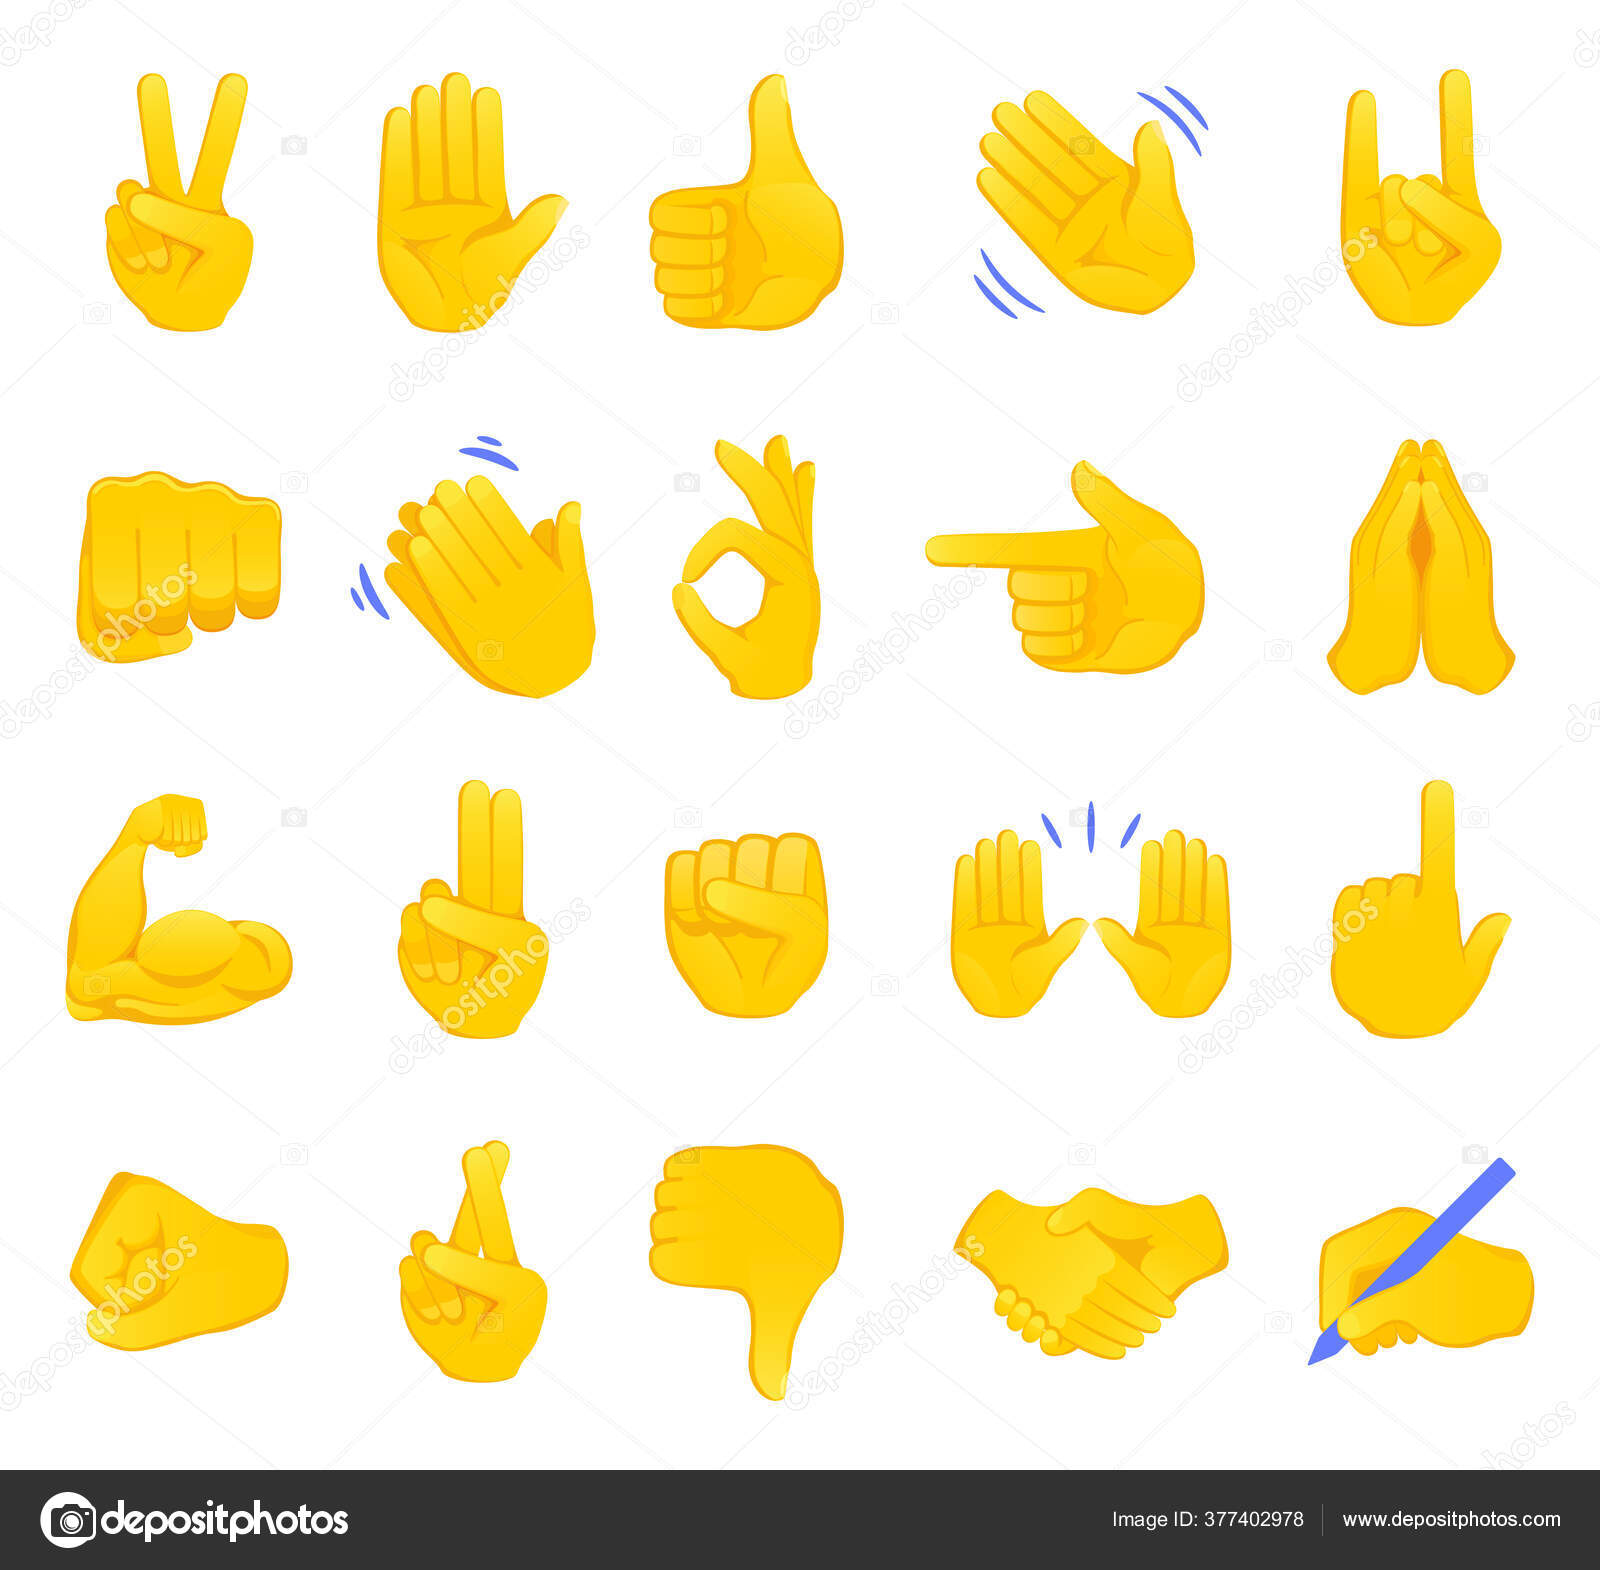 Handshake - Free hands and gestures icons